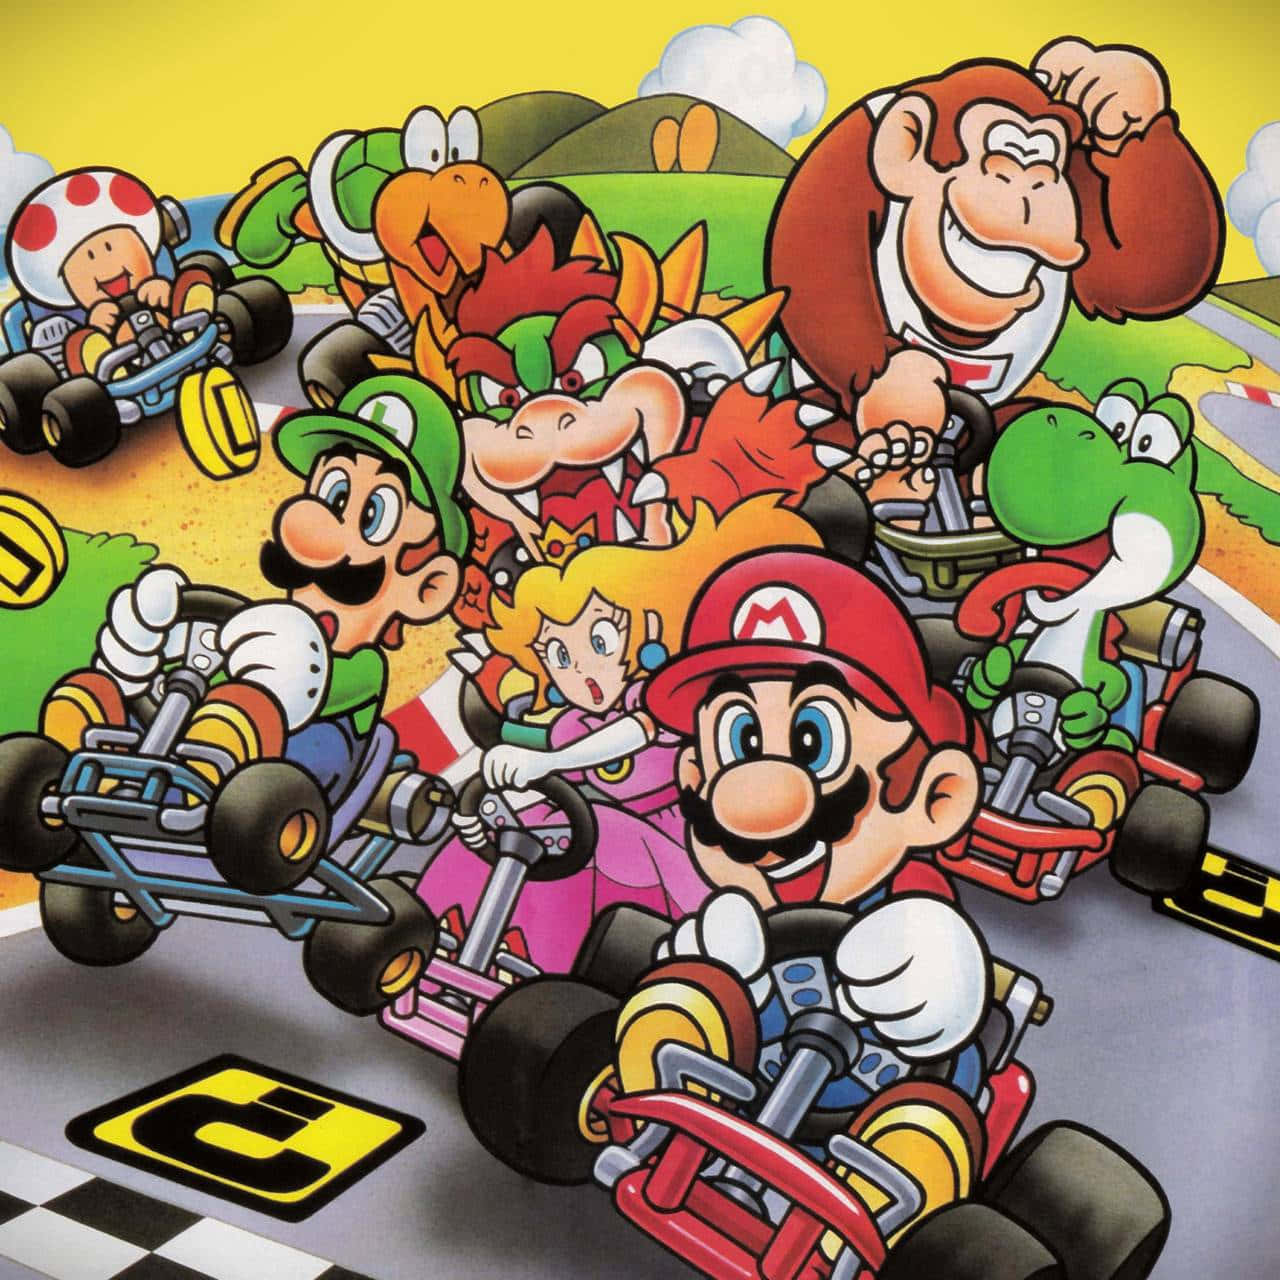 Race to the finish line in Mario Kart!